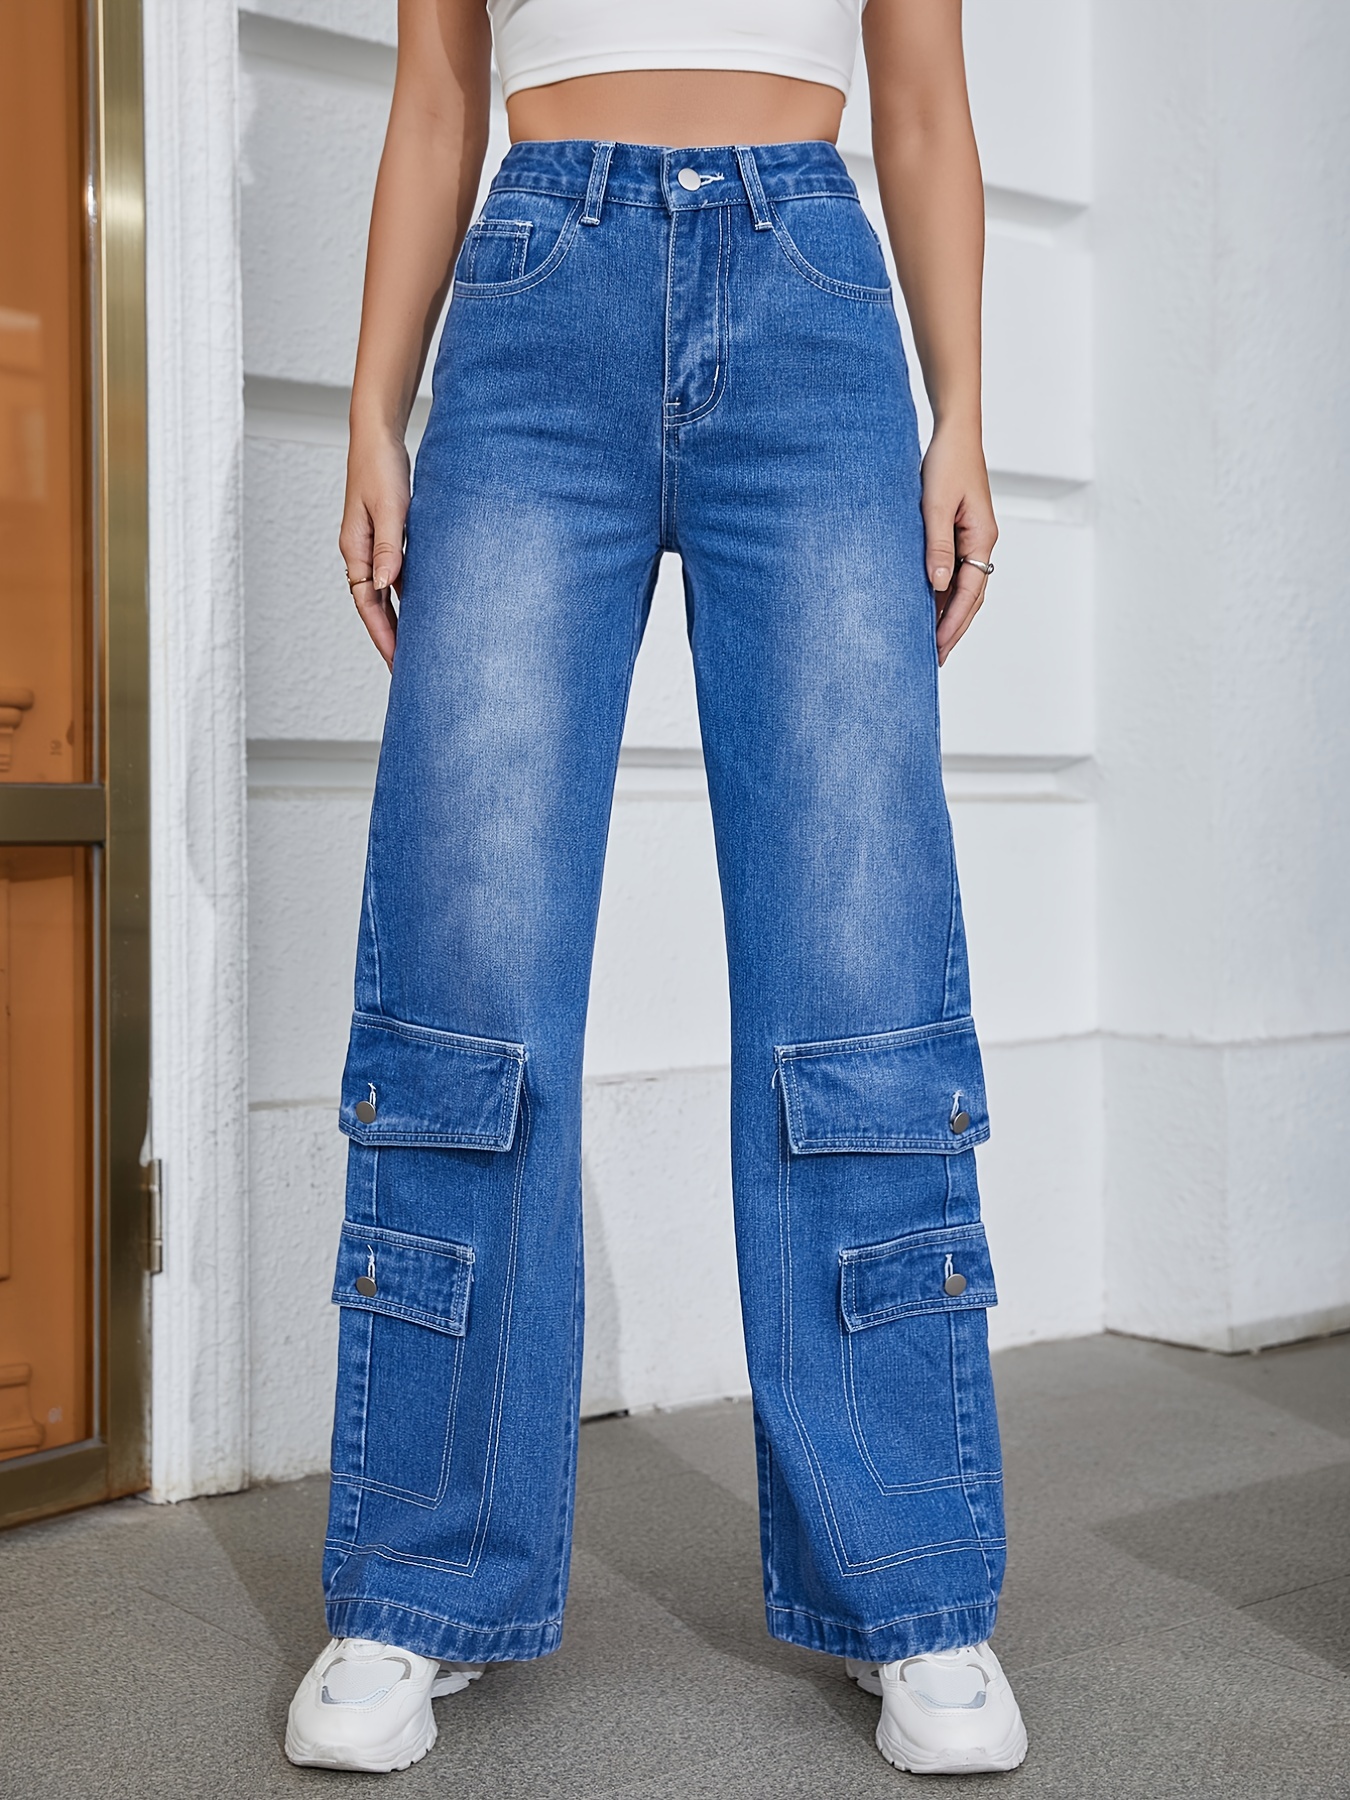 Women's Loose Fit Straight Leg Jeans with Multiple Pockets on Jean